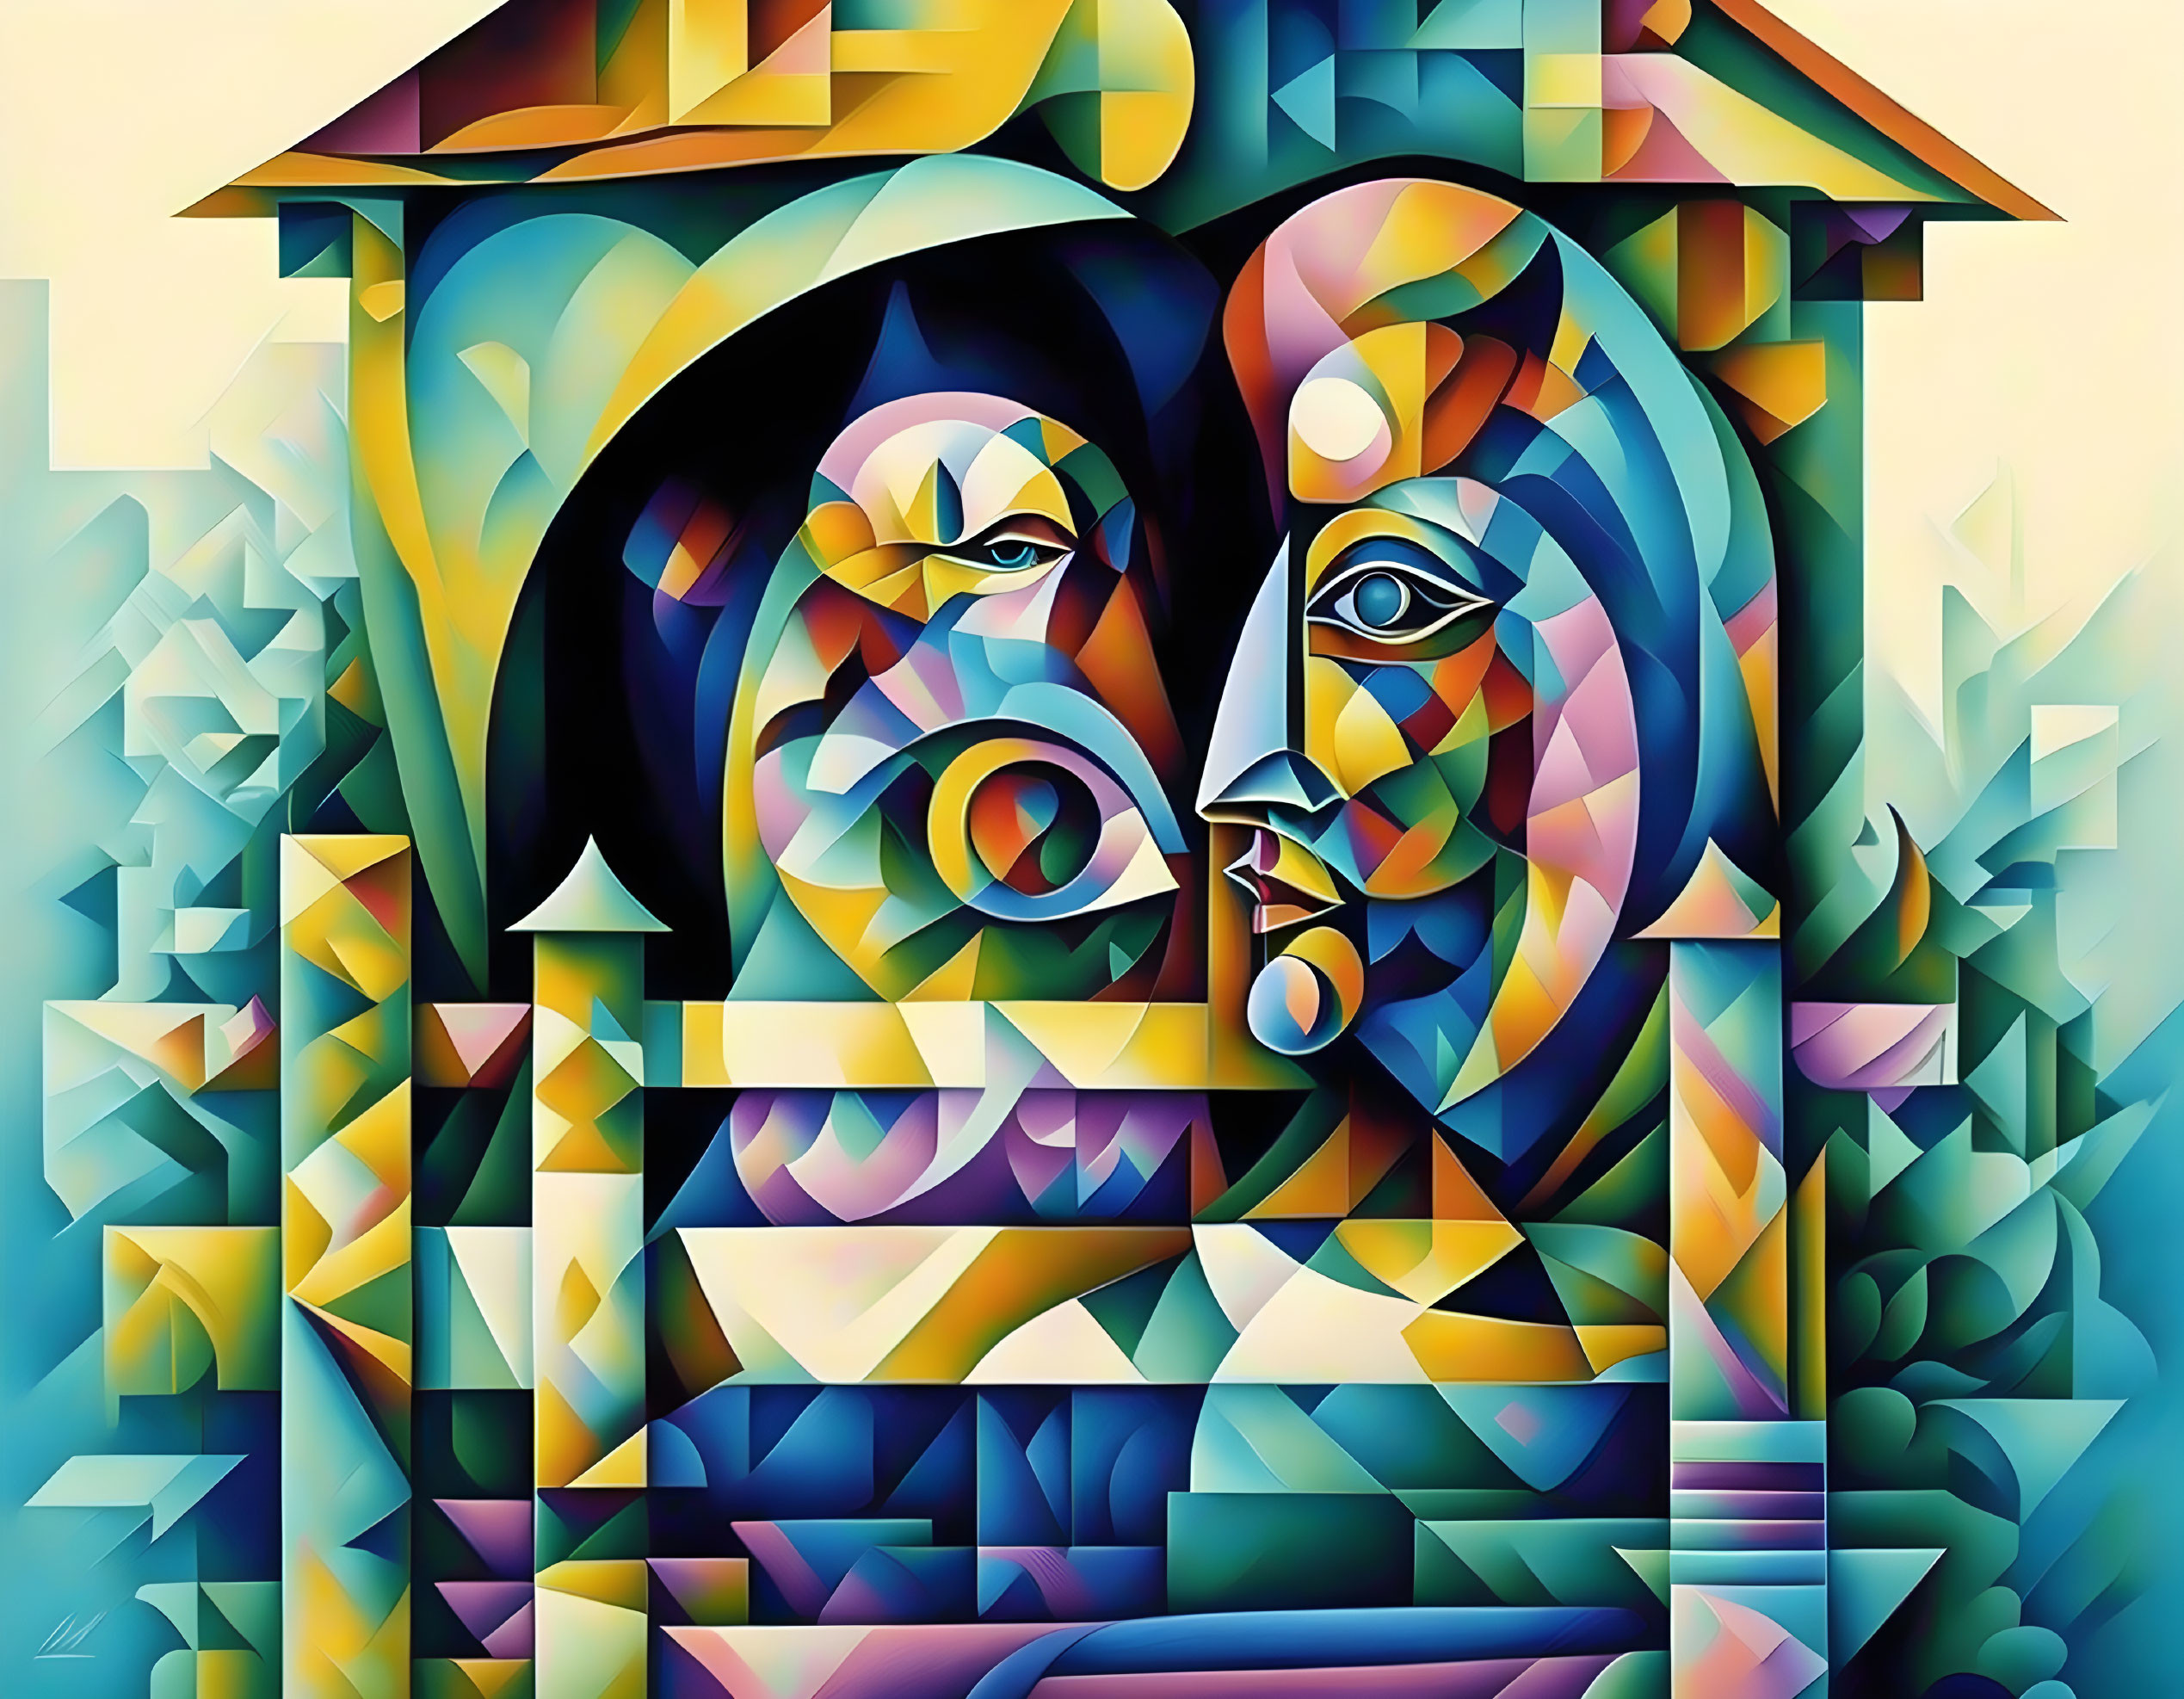 Vibrant Cubist-style painting of abstract double-faced head in geometric structure